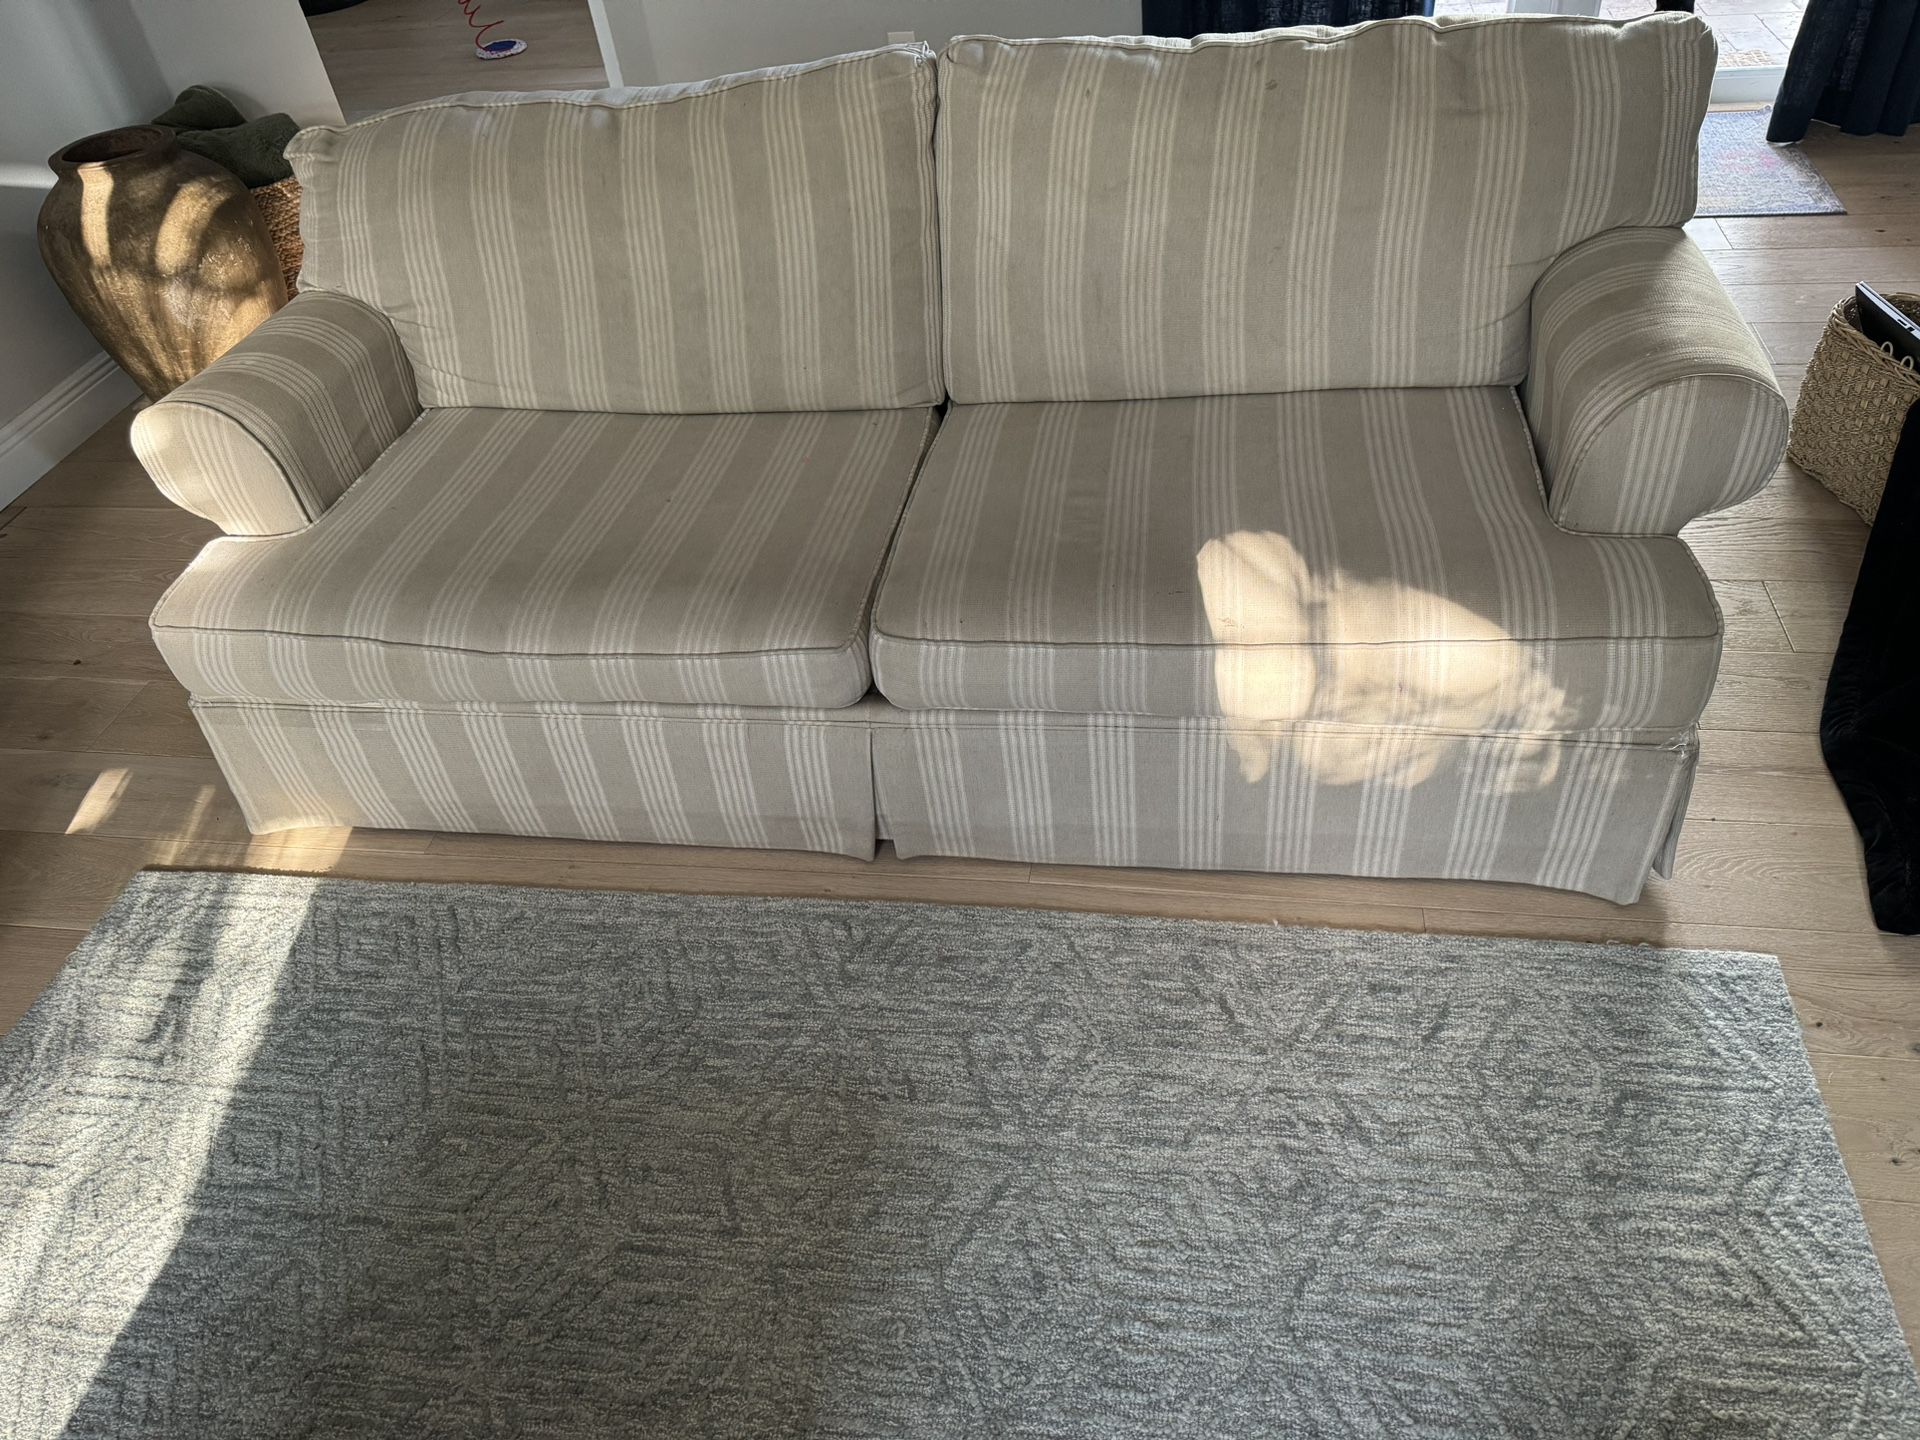 2 Sofas Free Pick Up Today